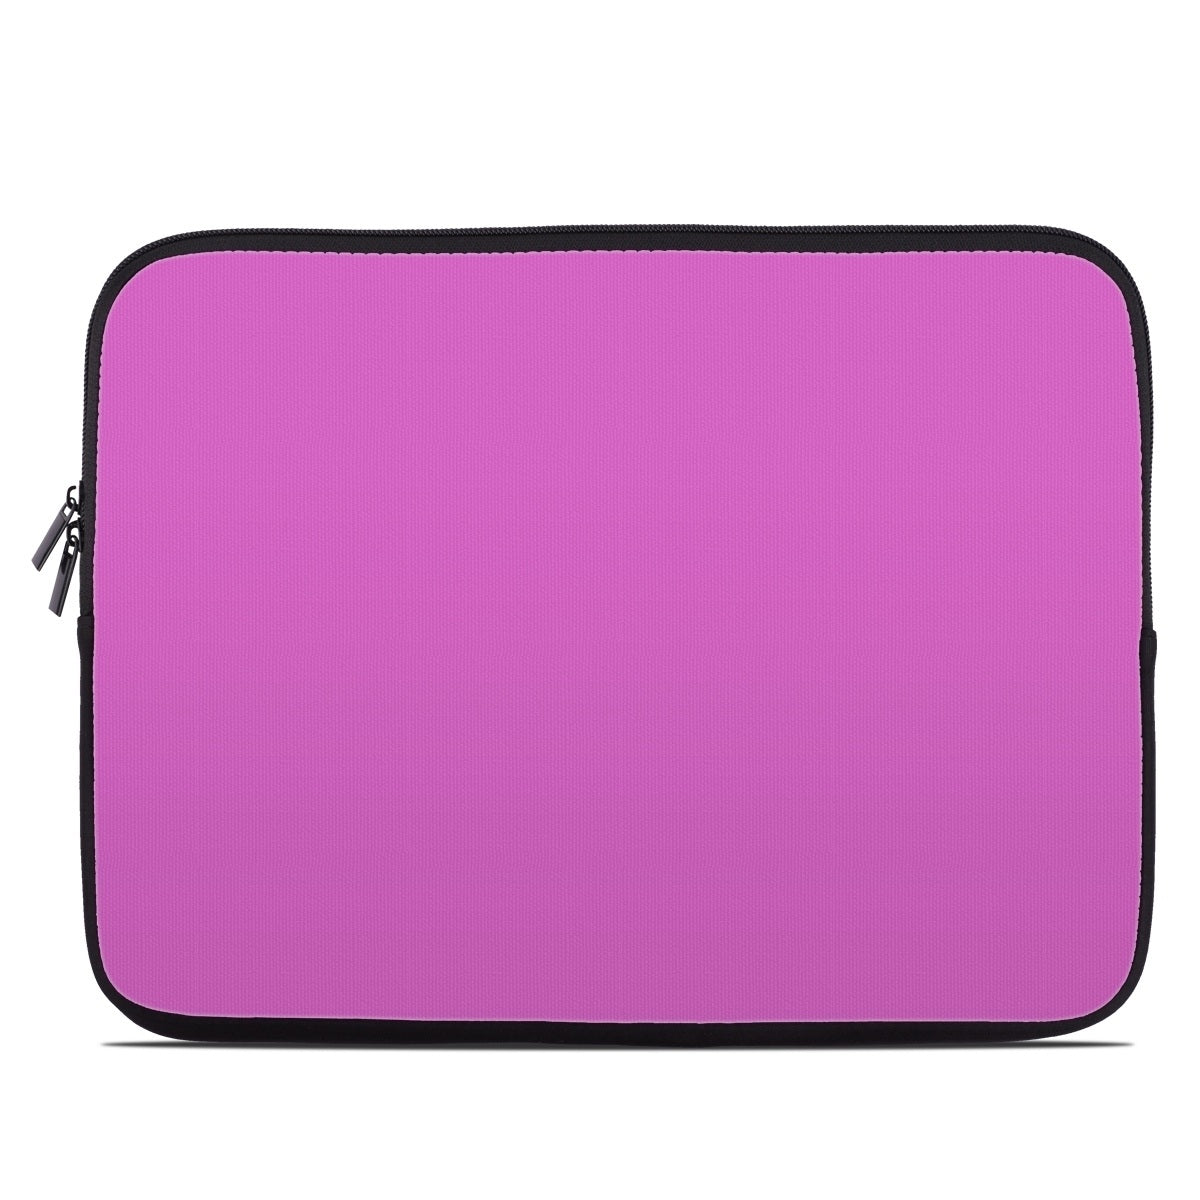 Solid State Vibrant Pink - Laptop Sleeve